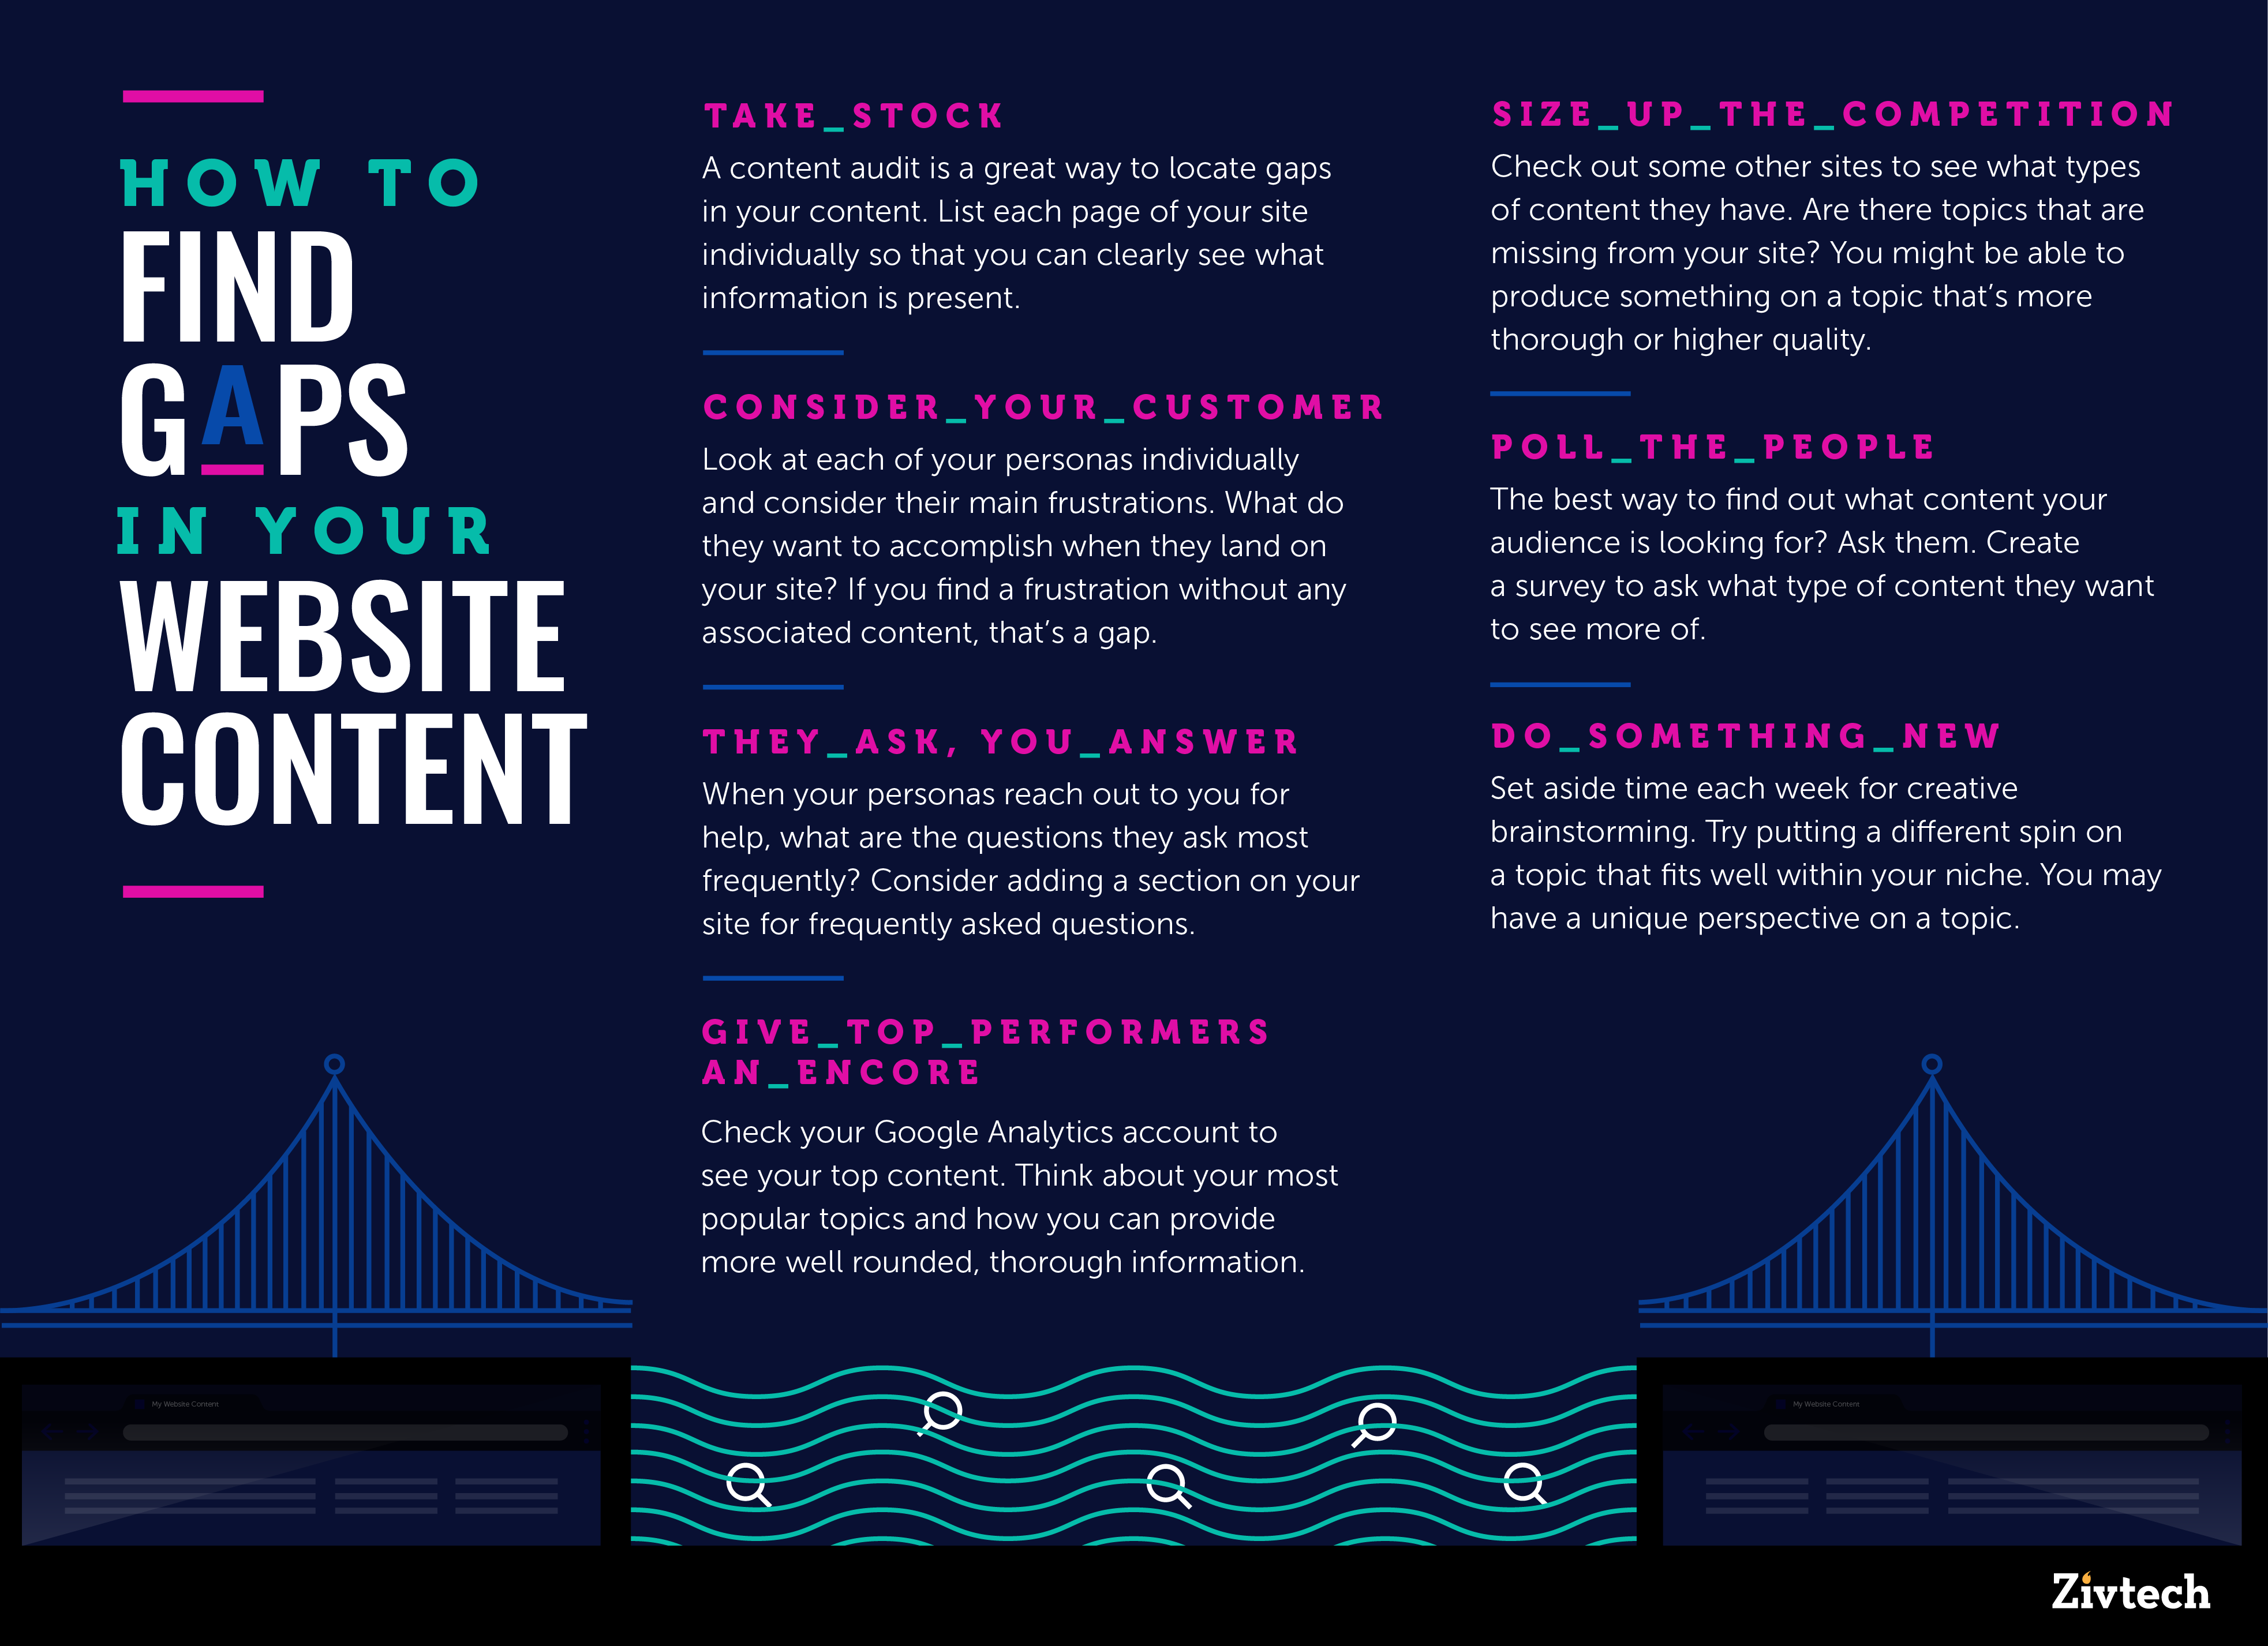 How to find gaps in your website content